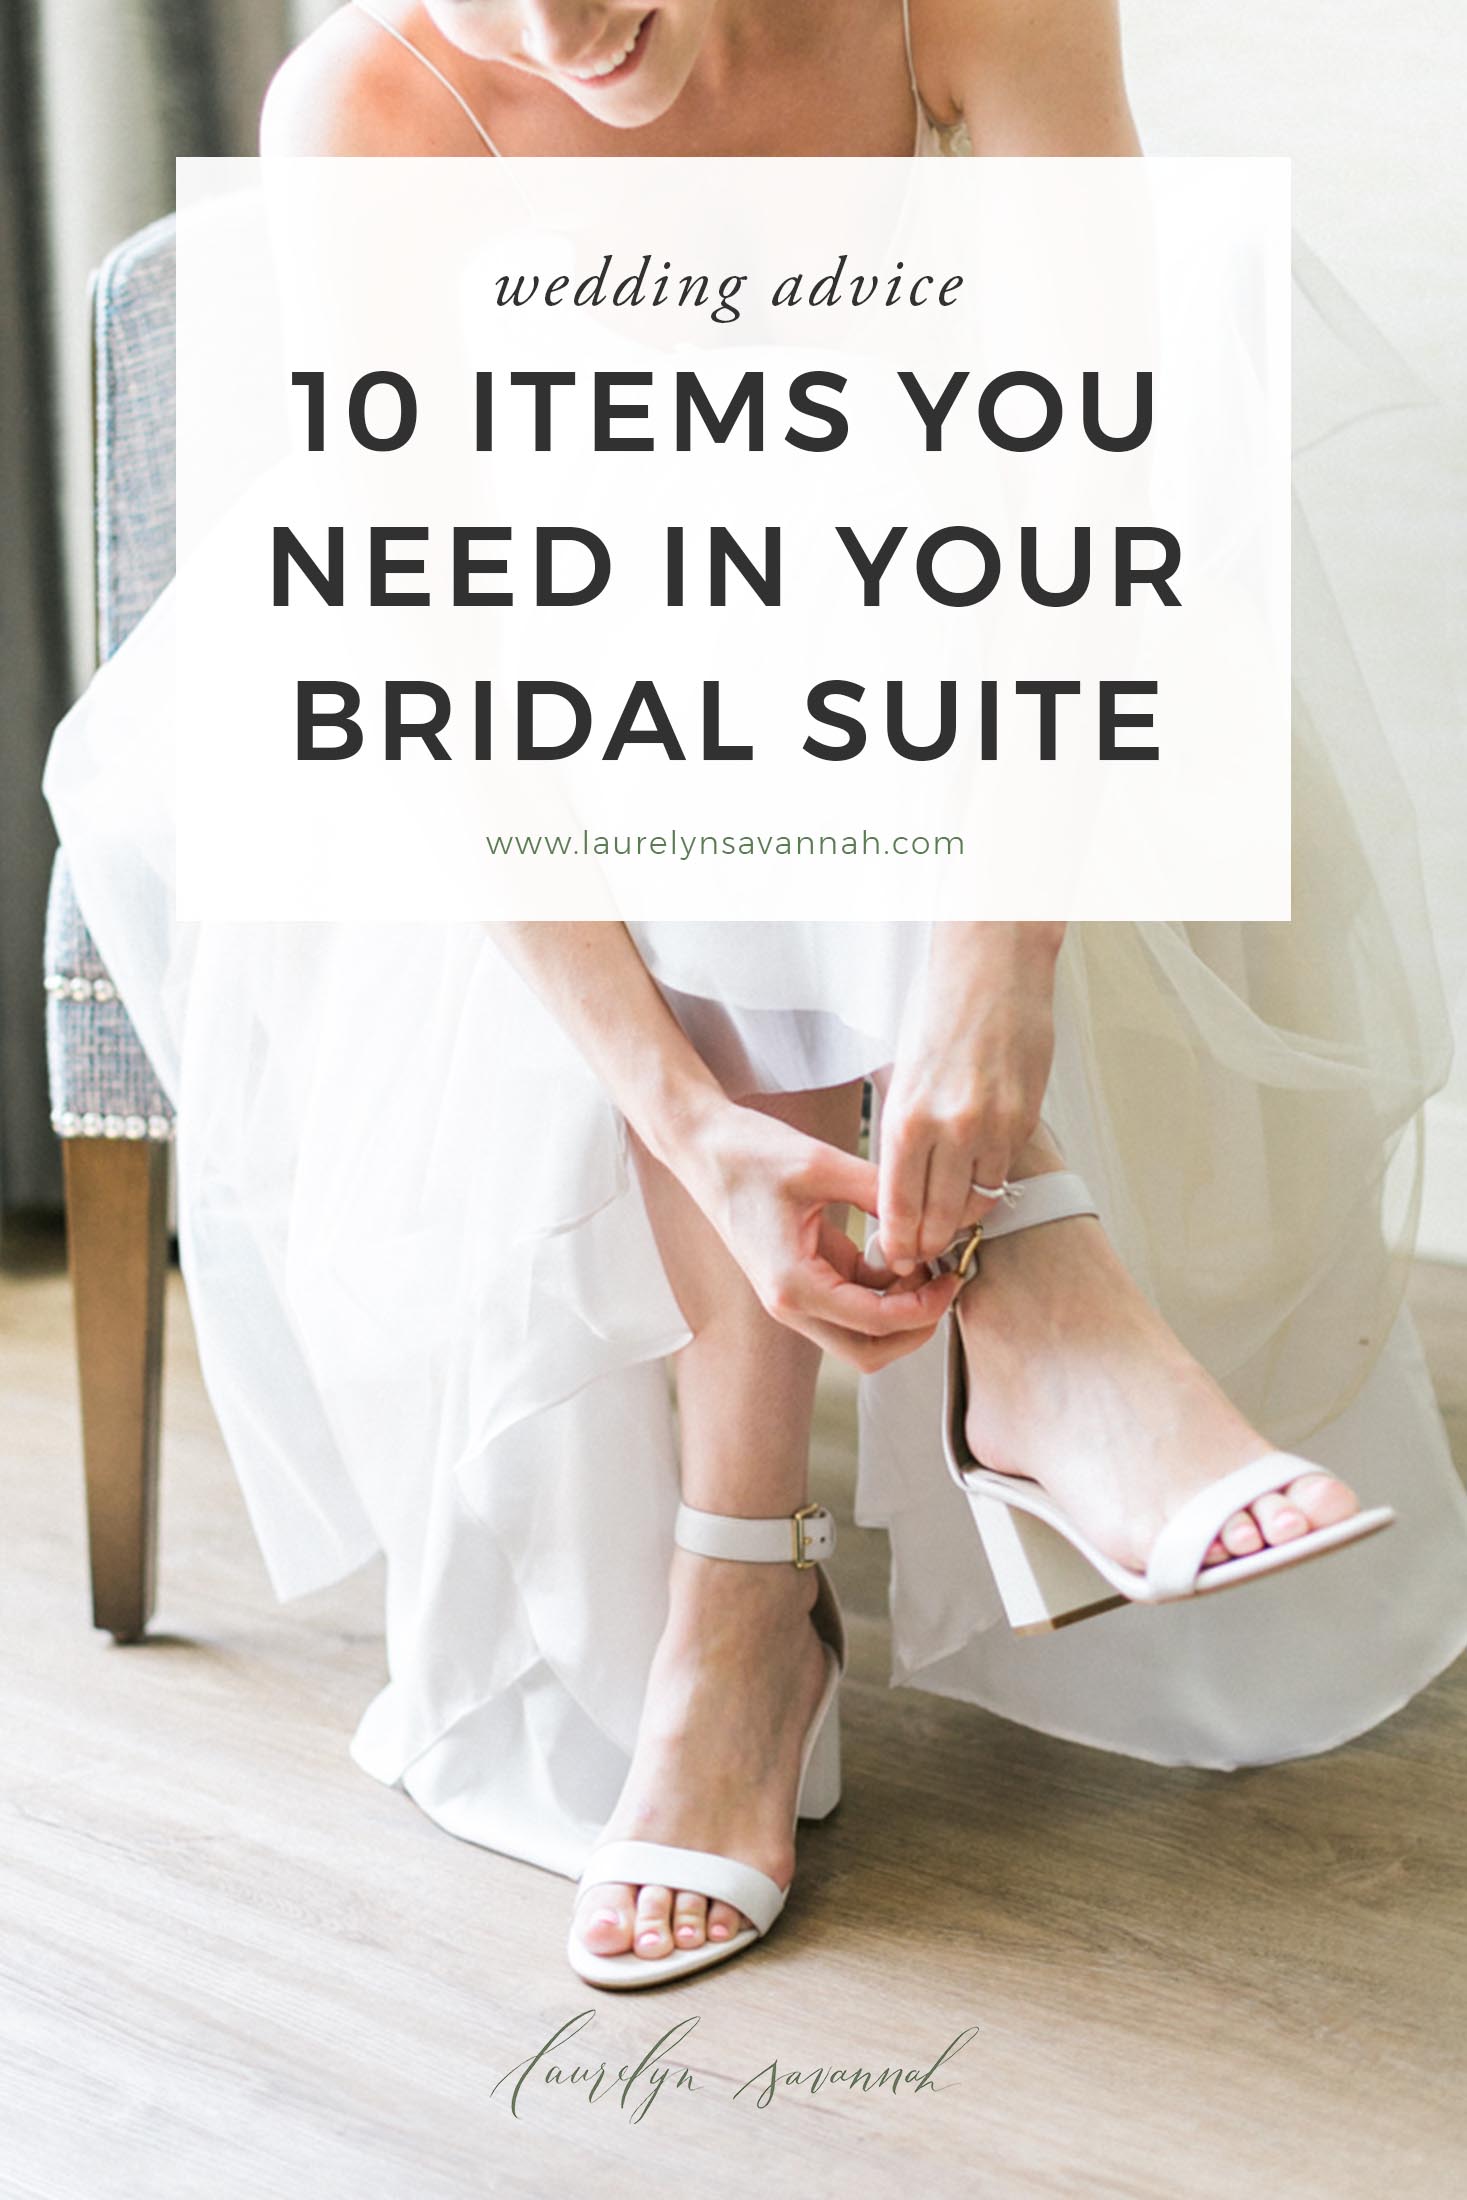 10 items you need in your bridal suite, getting ready and wedding advice for brides planning a modern and elegant wedding day. photo by Laurelyn Savannah Photography